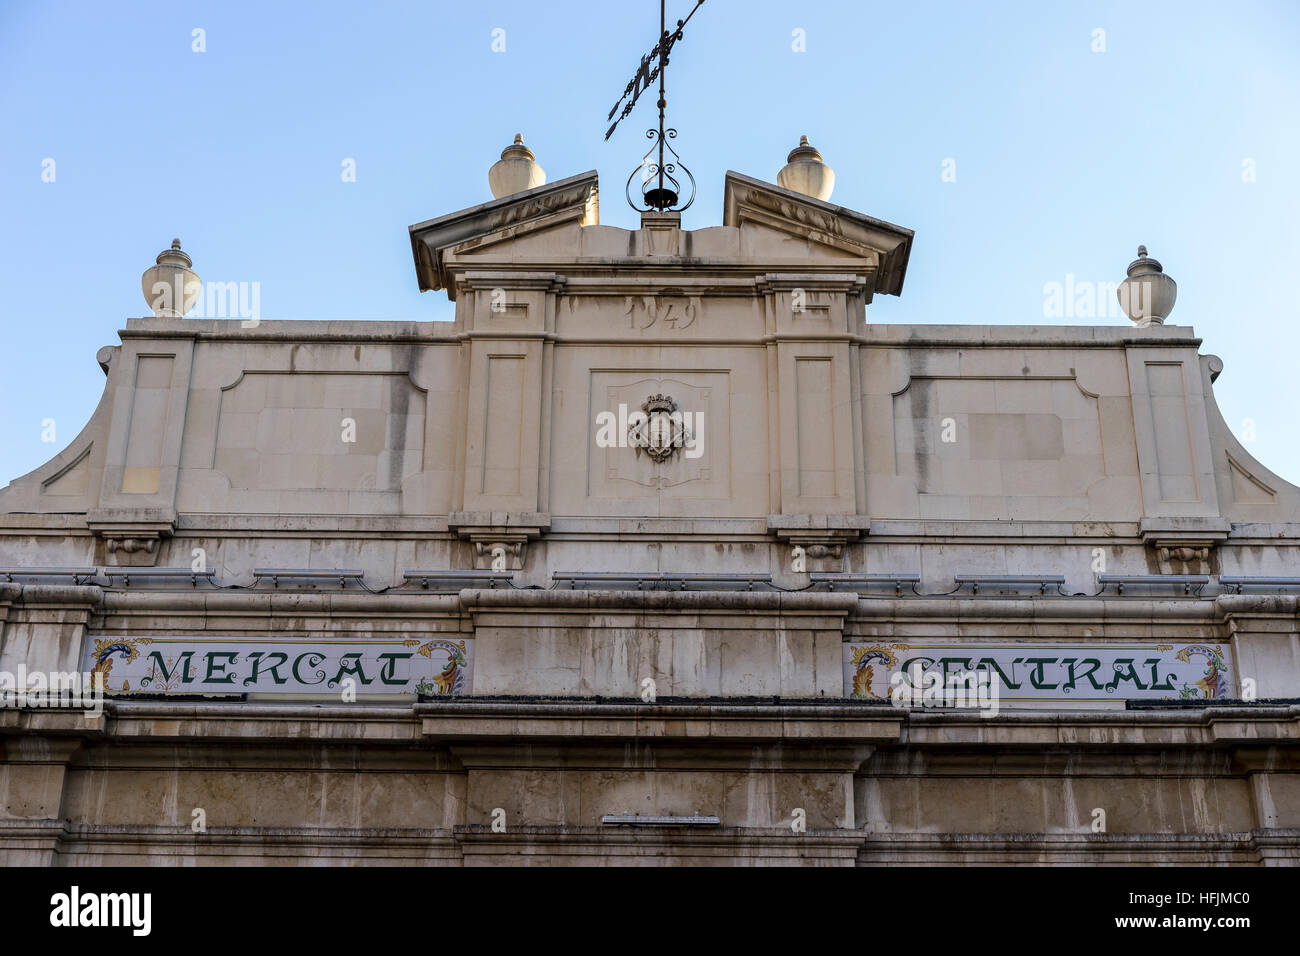 Traditional architecture of the center of the Spanish city of Castellon, Valencian Community Stock Photo